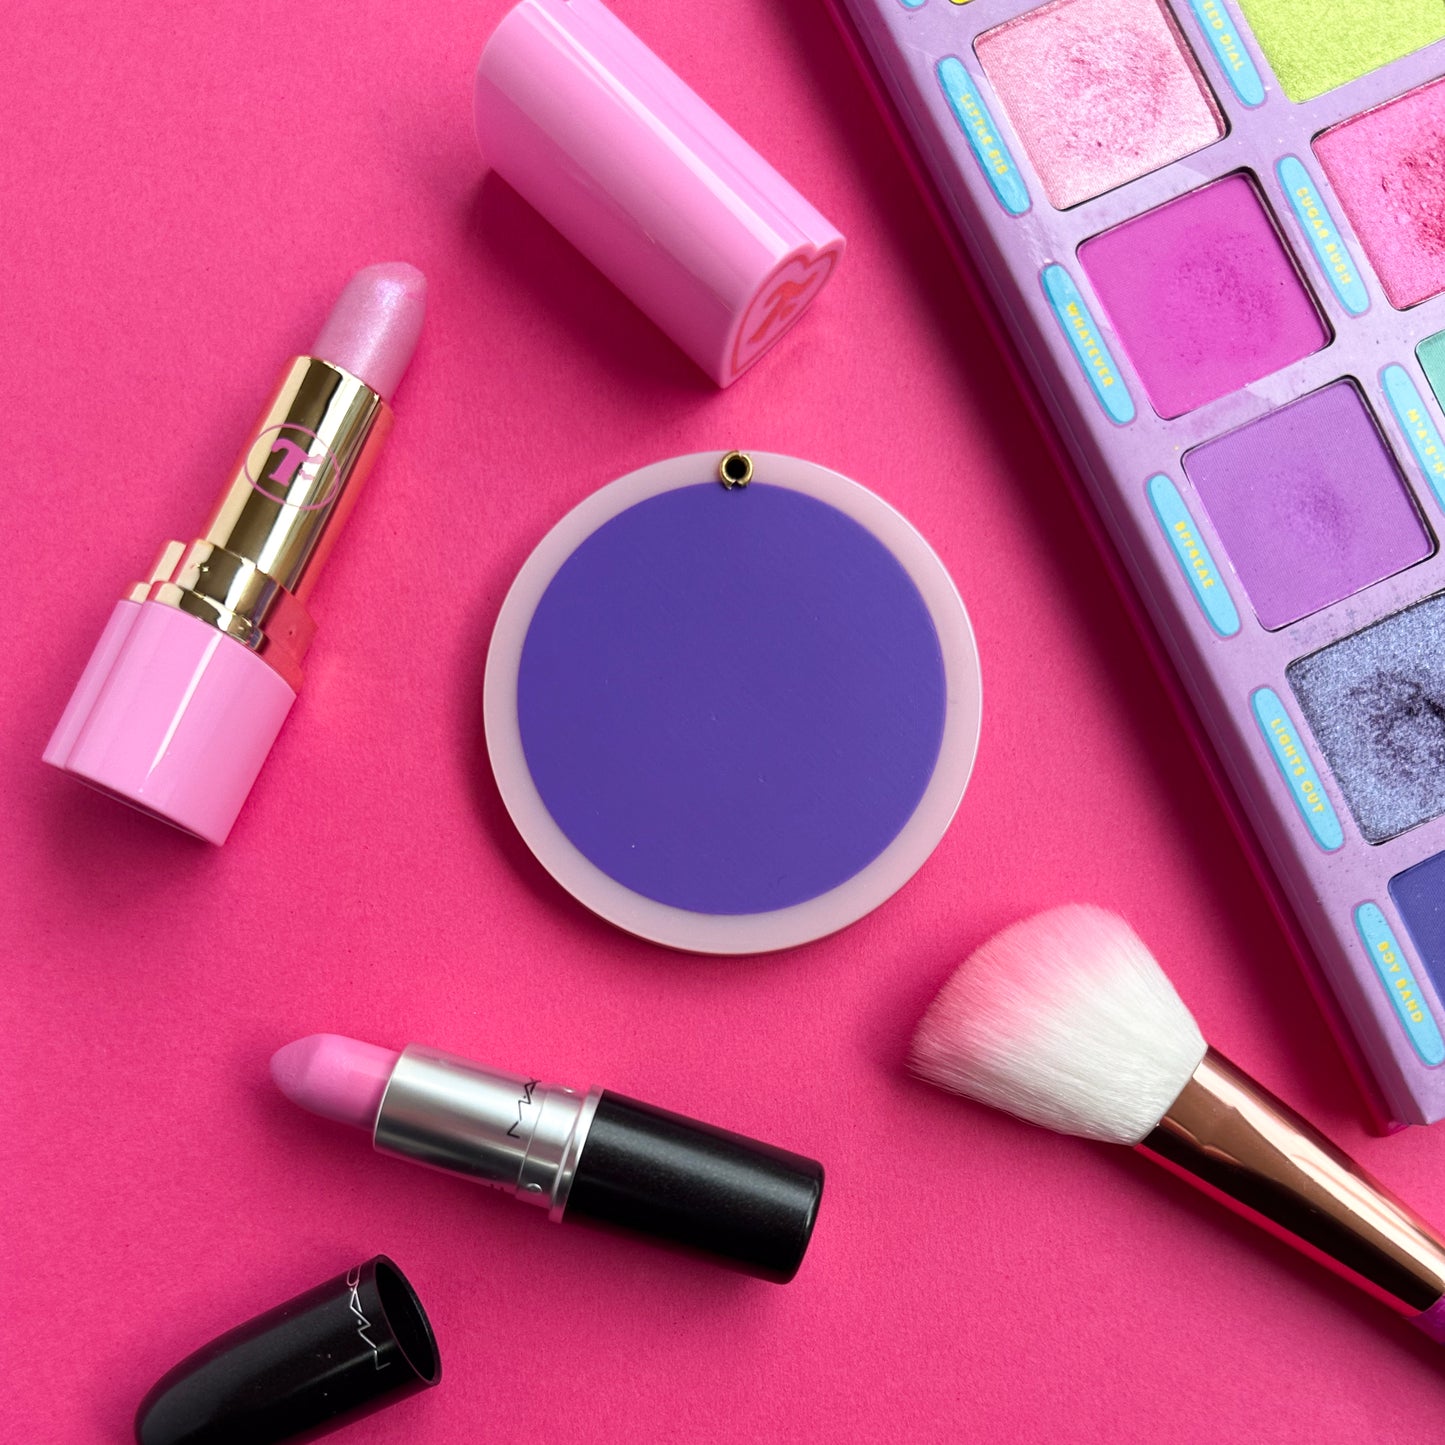 The back of the compact mirror that is a purple circle with a pastel pink border. The item is on a hot pink background and is surrounded by two open lip sticks, a pink makeup brush and a pink and purple eyeshadow palette. 